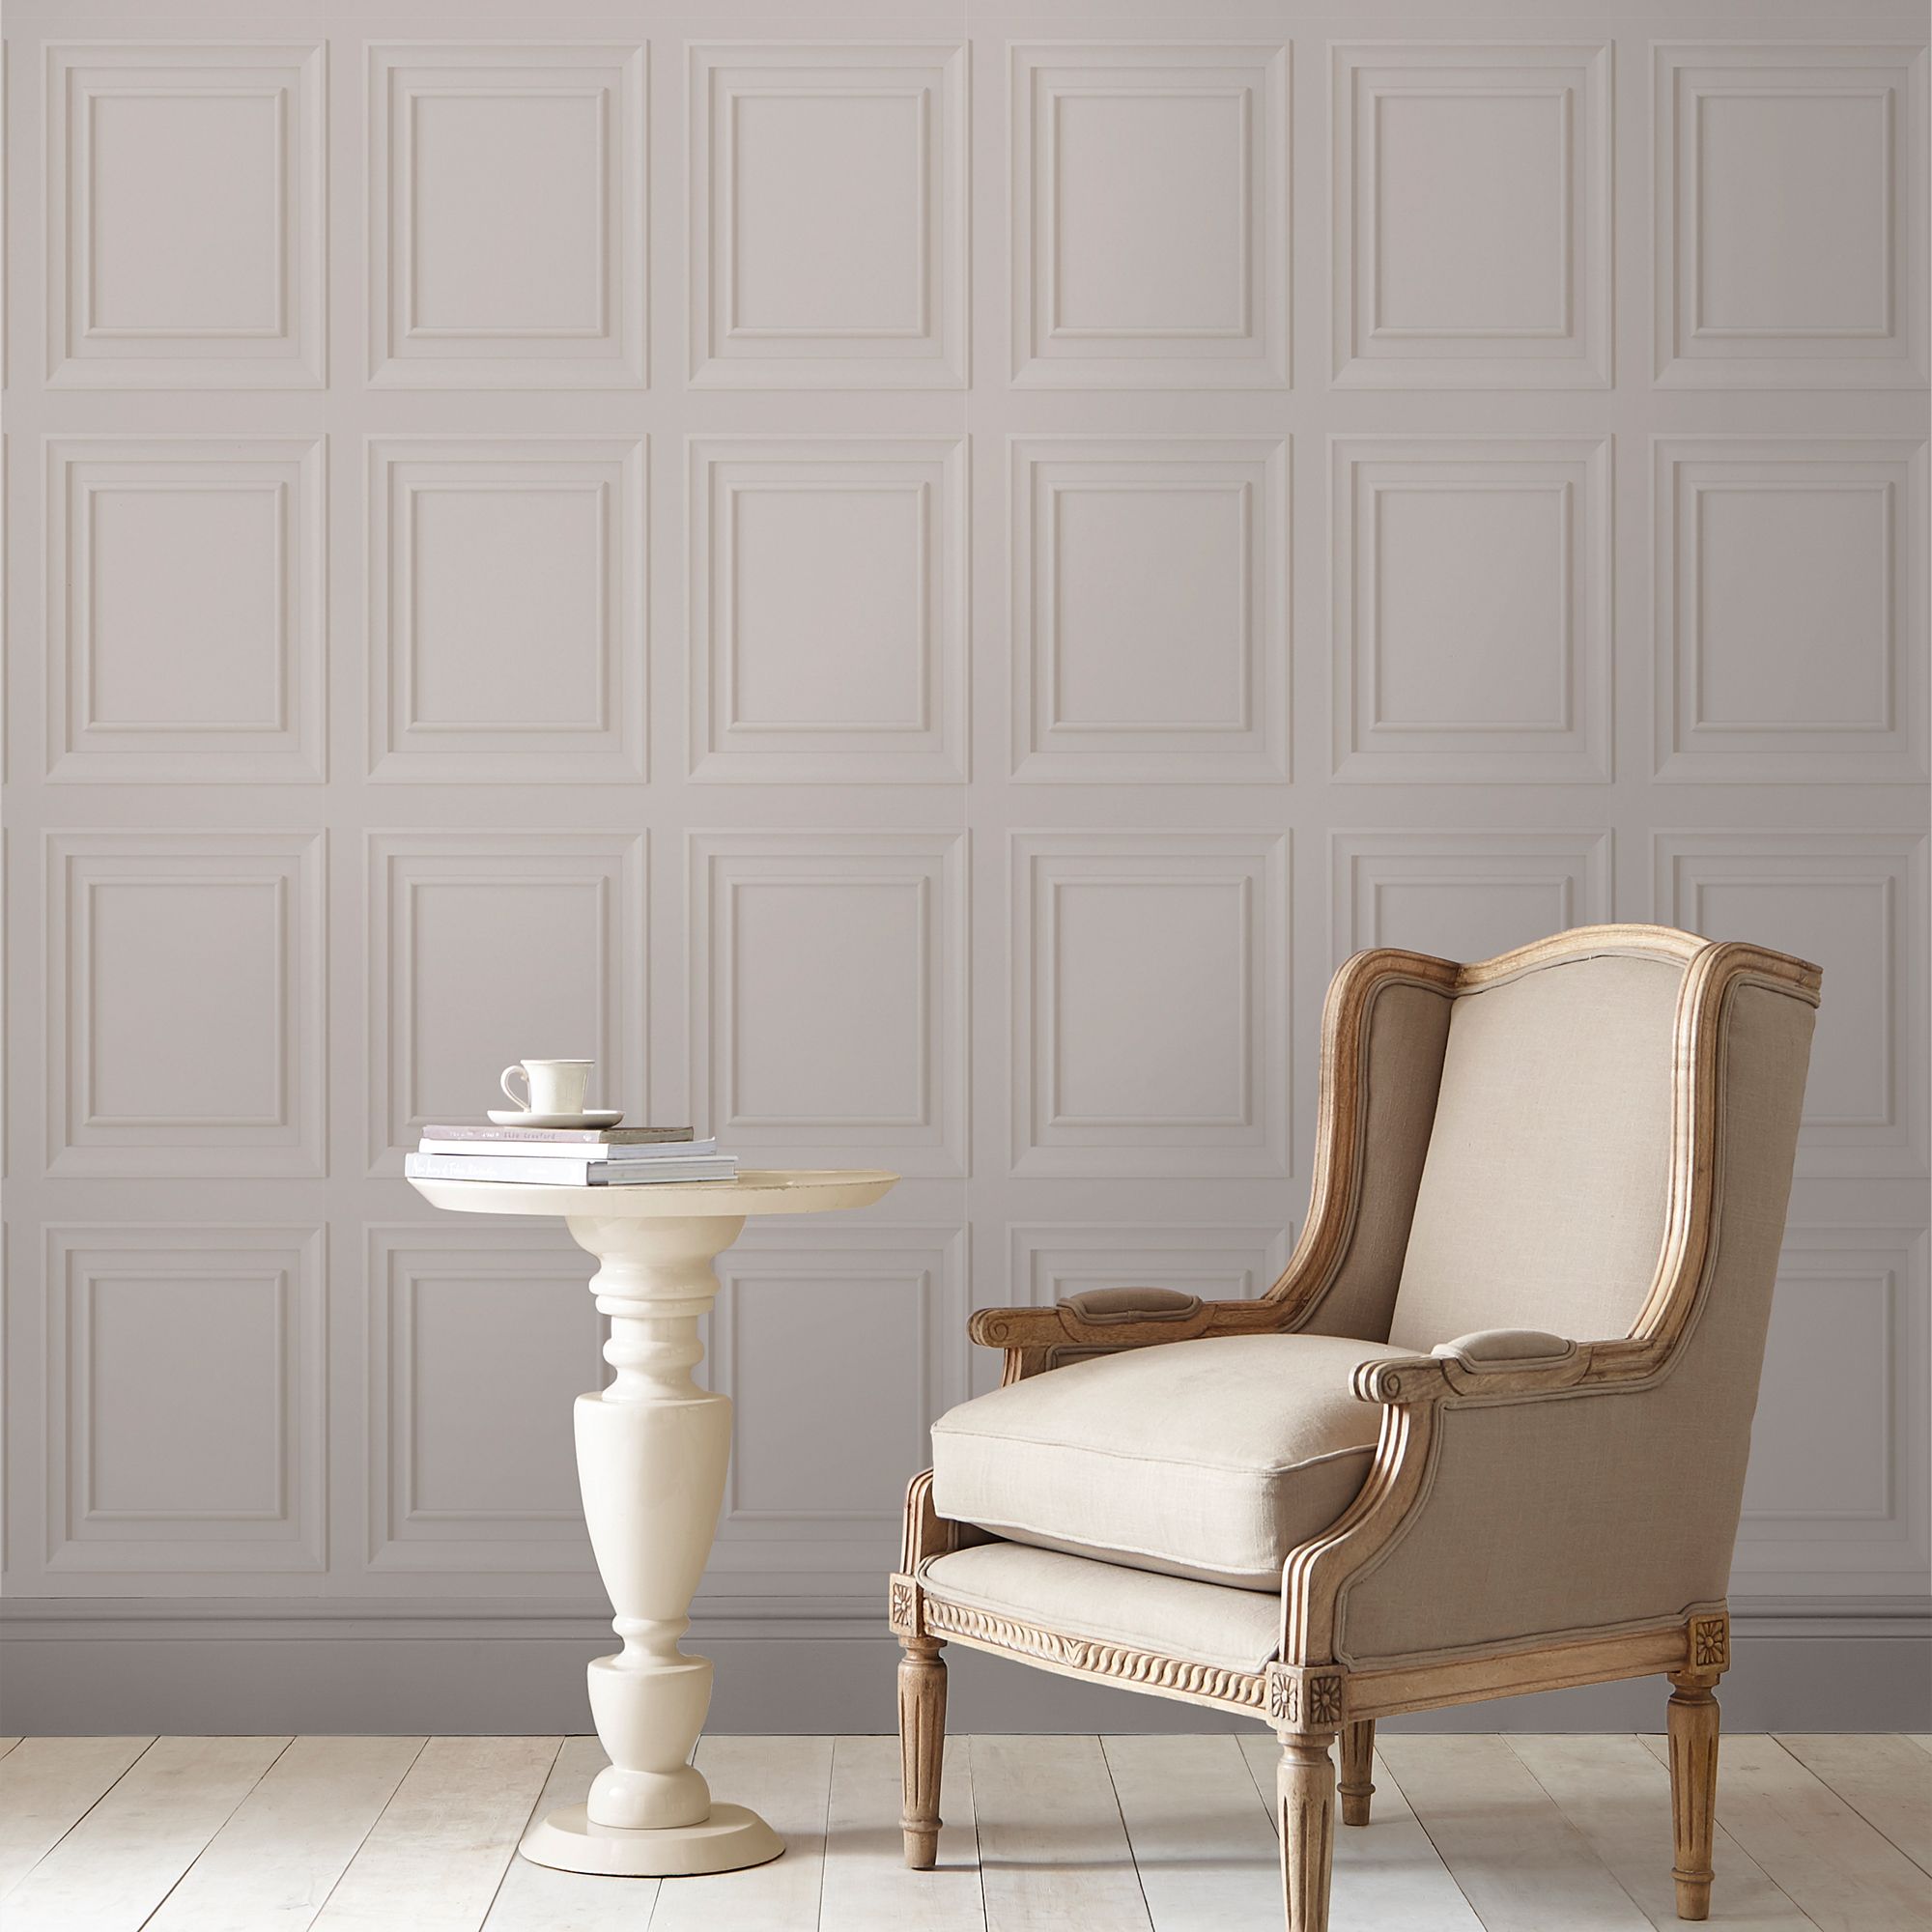 Laura Ashley Country charm Dove Grey Wood panel Smooth Wallpaper Sample